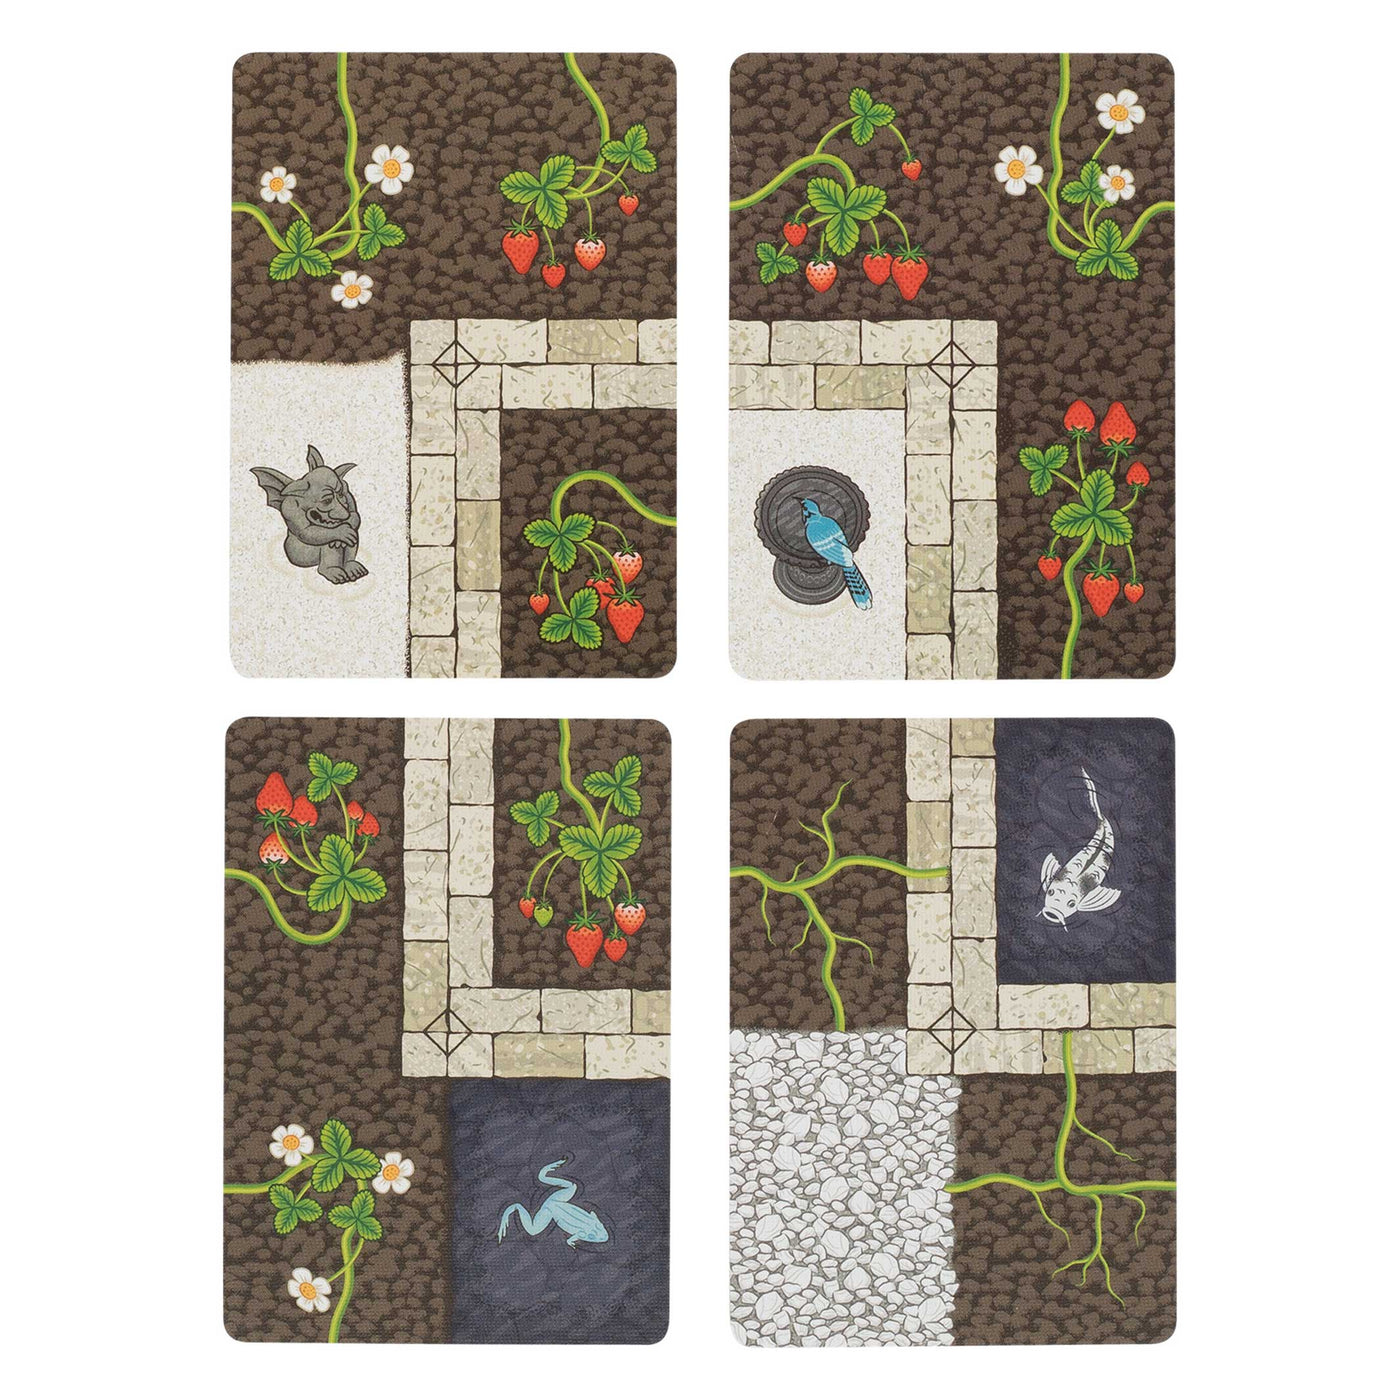 Grid of Cards showing artwork from Strawberry Sunset game